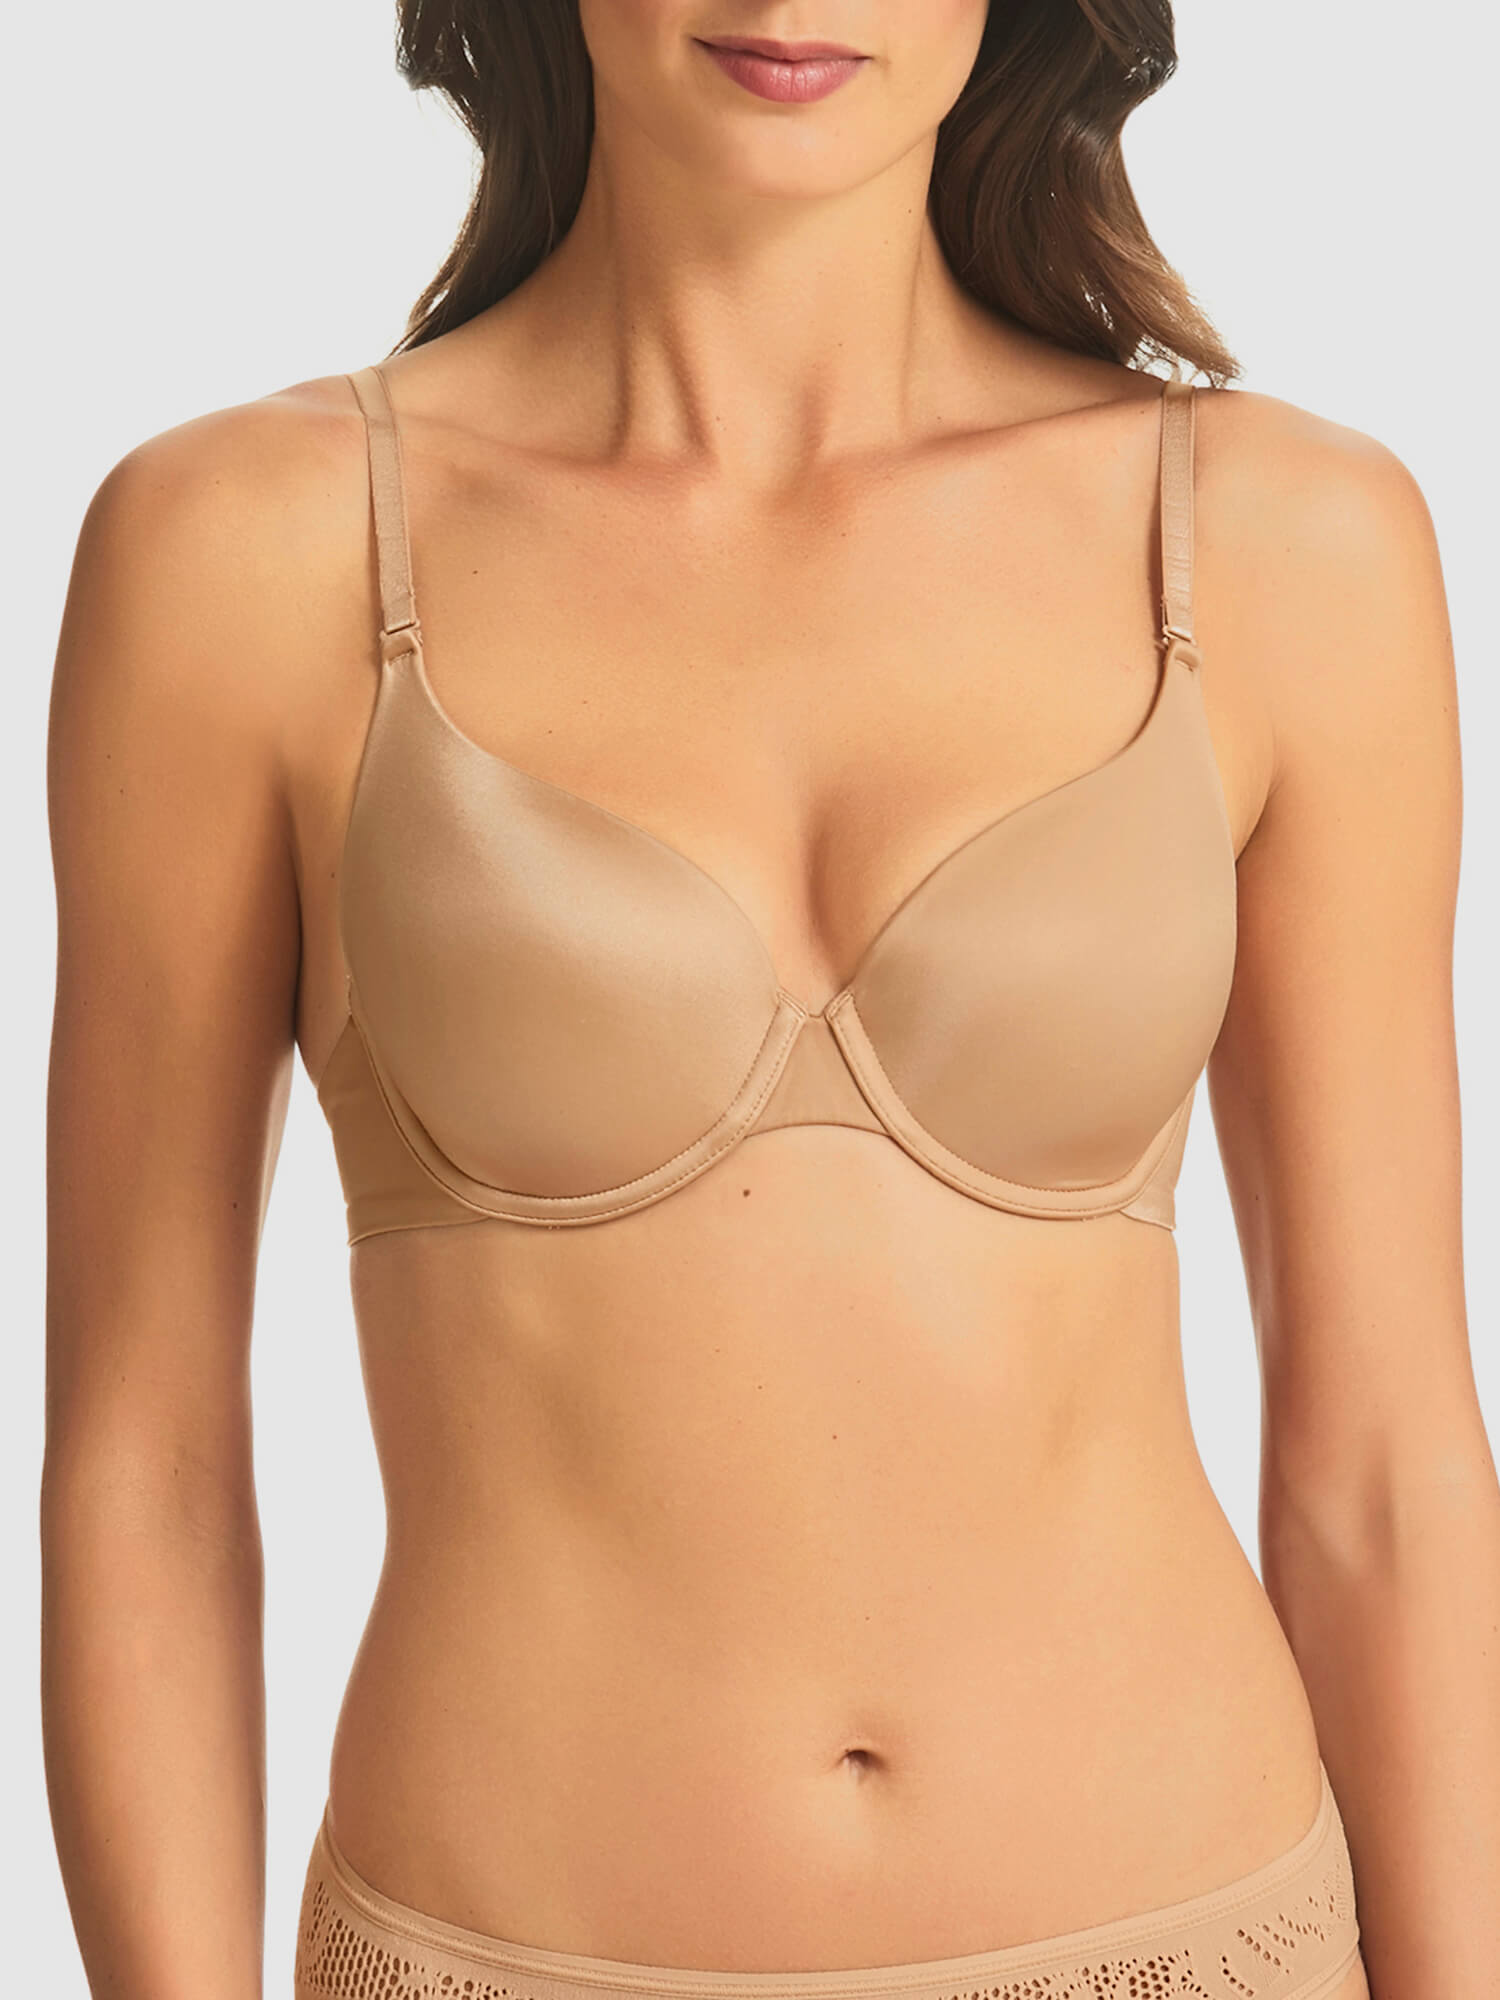 NearlyNude PLATINUM 2x2 Modal Ribbed Double Scoop Wirefree Bralette, US  Large 